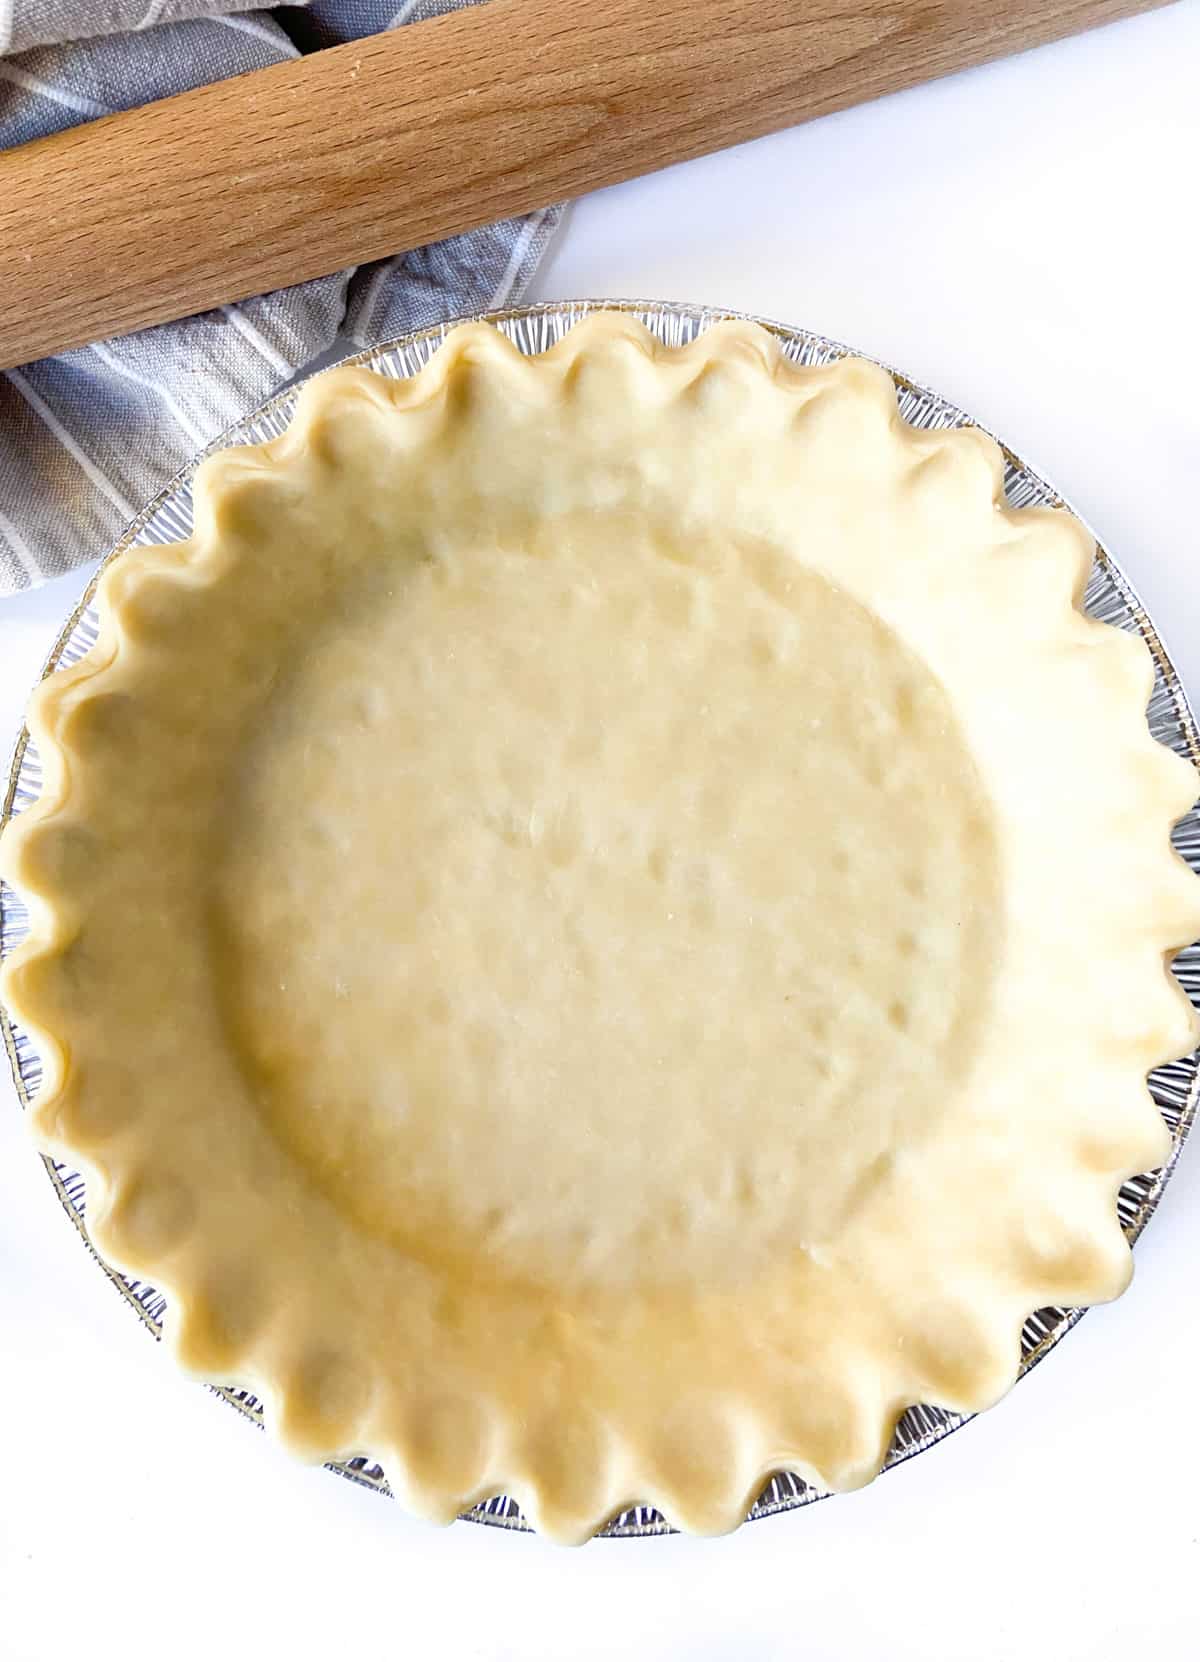 An unbaked pie crust in a foil pie tin.